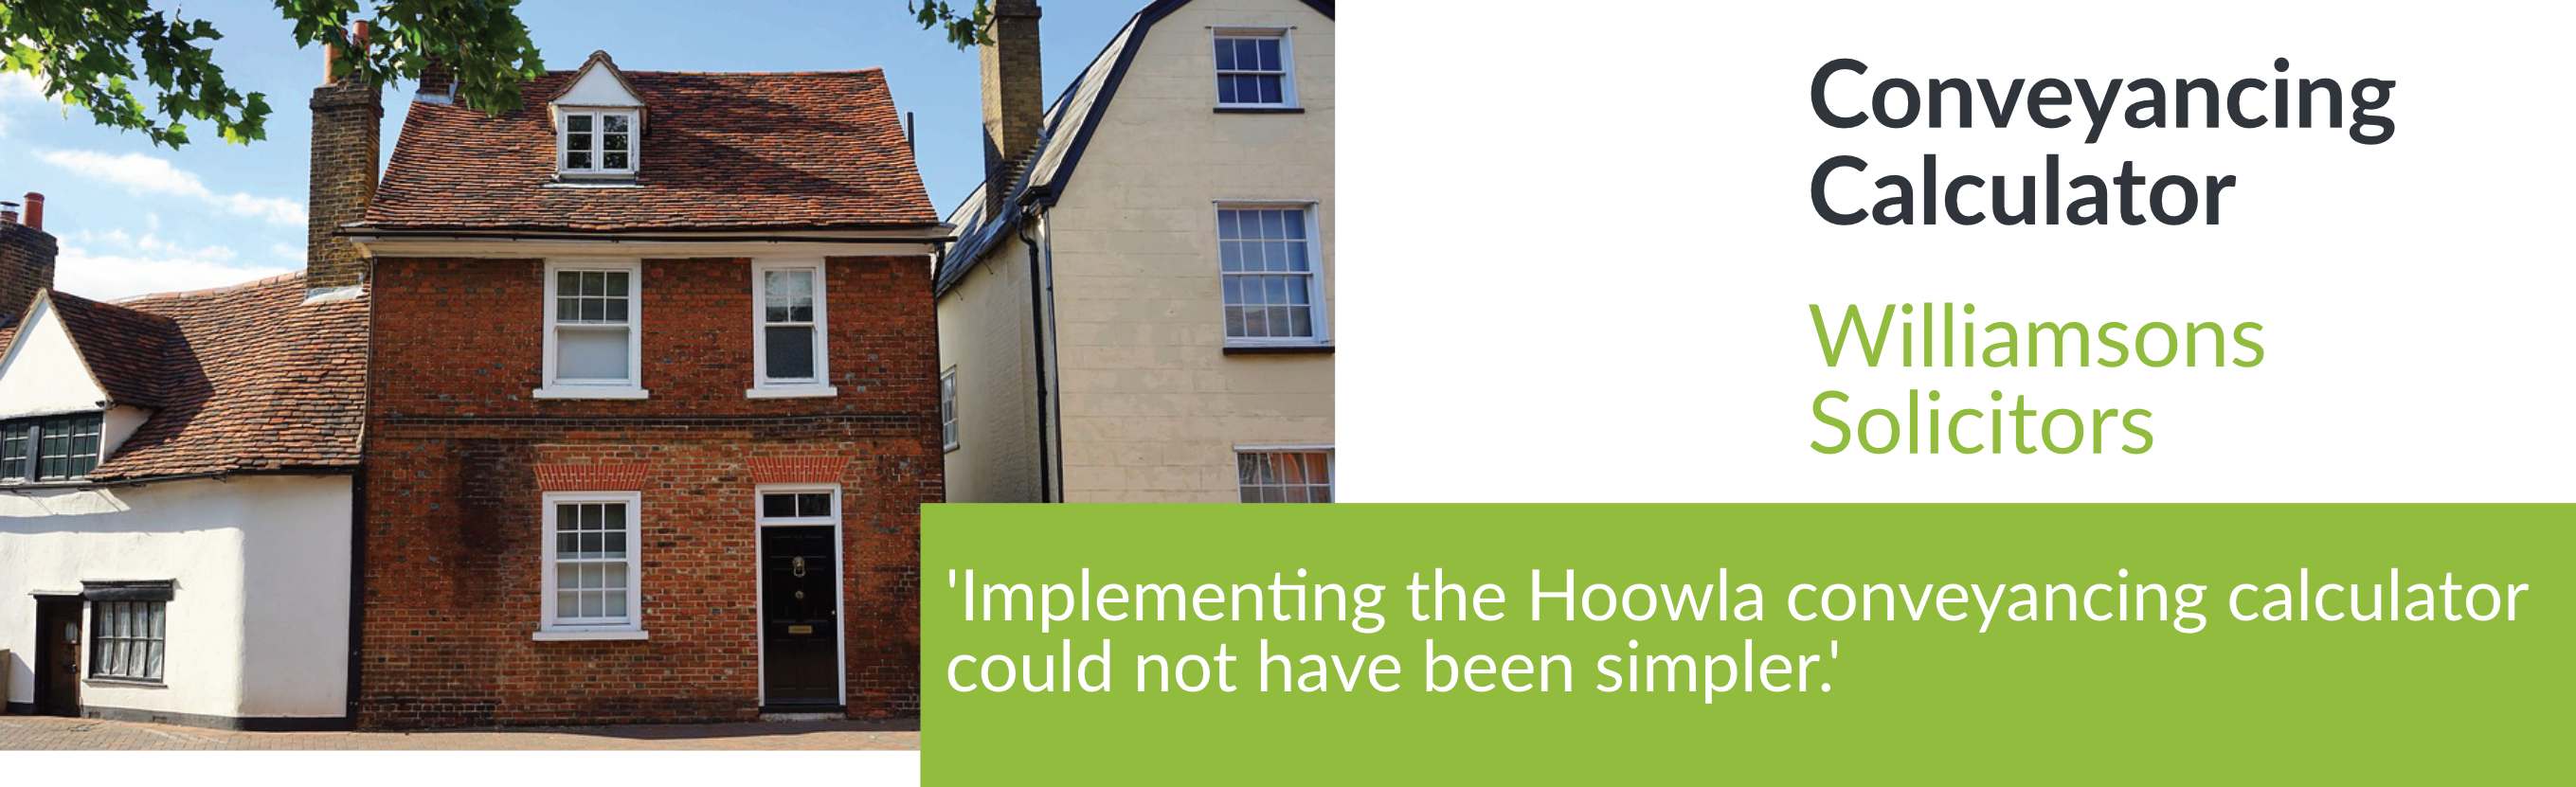 Hoowla Review Conveyancing Calculator Williamsons Solicitors